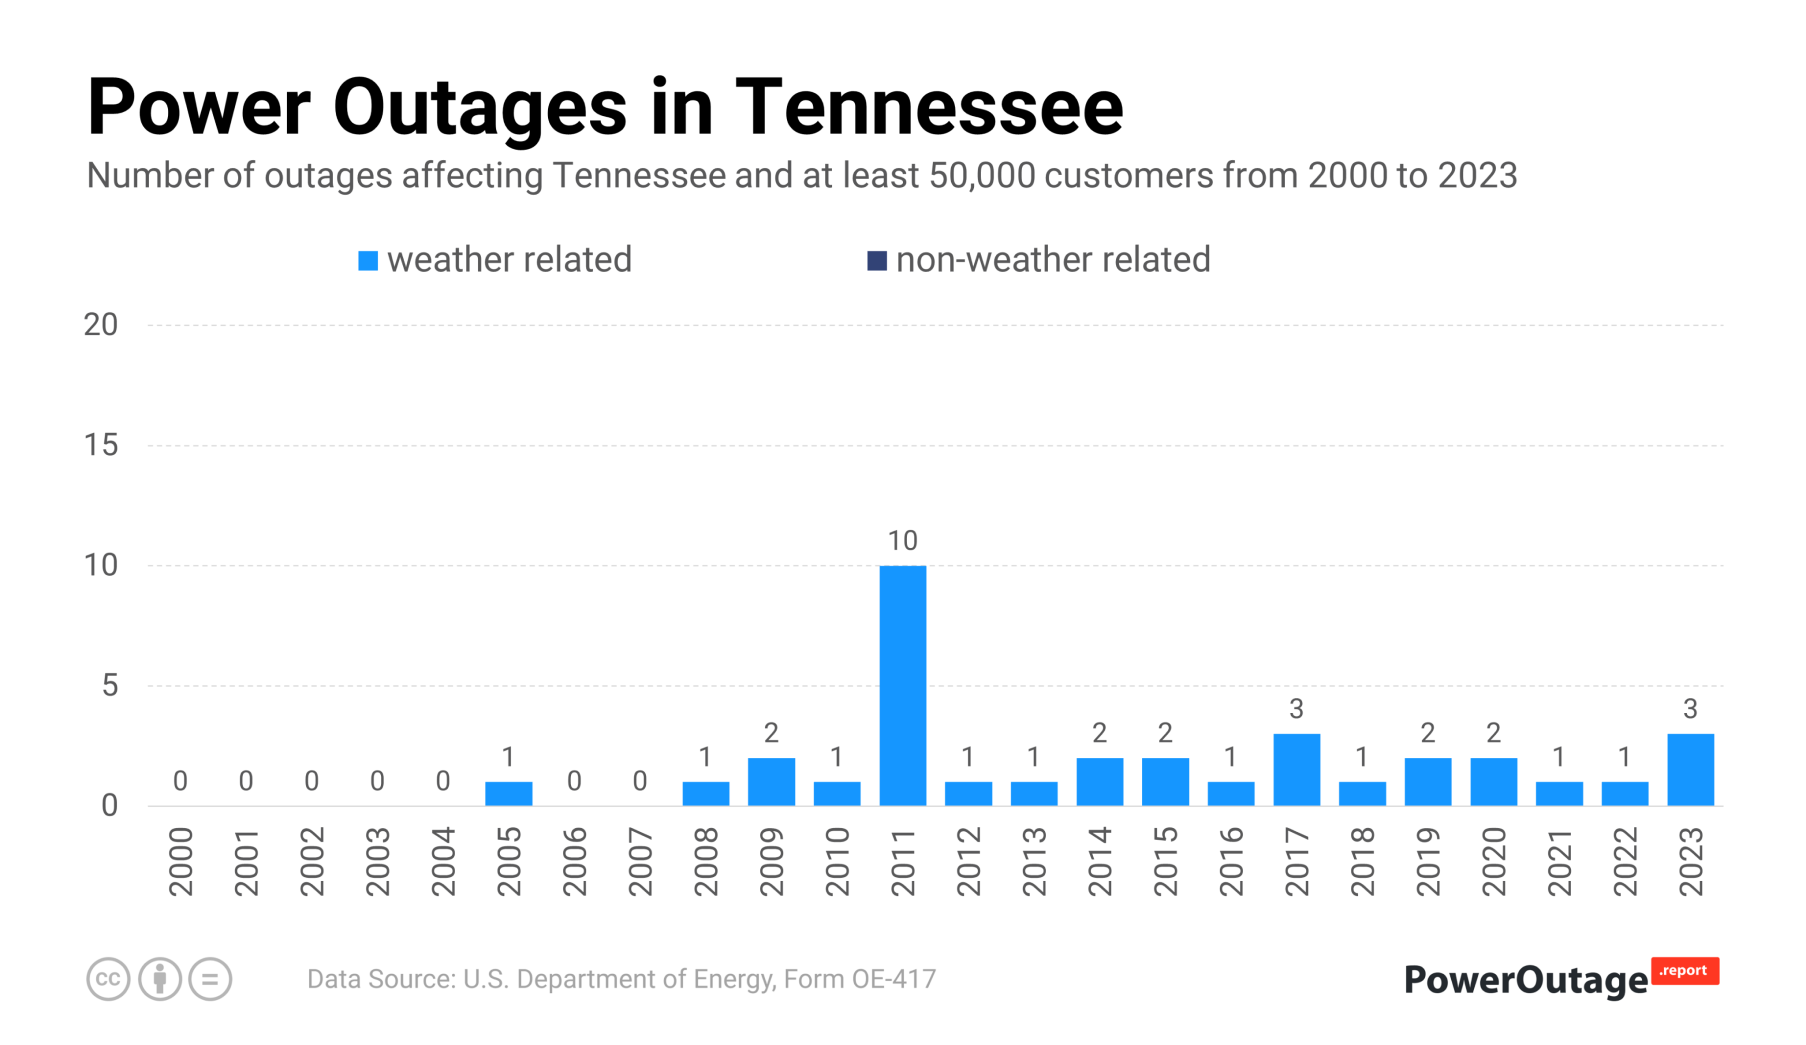 Tennessee Power Outage Statistics (2000 - 2022)